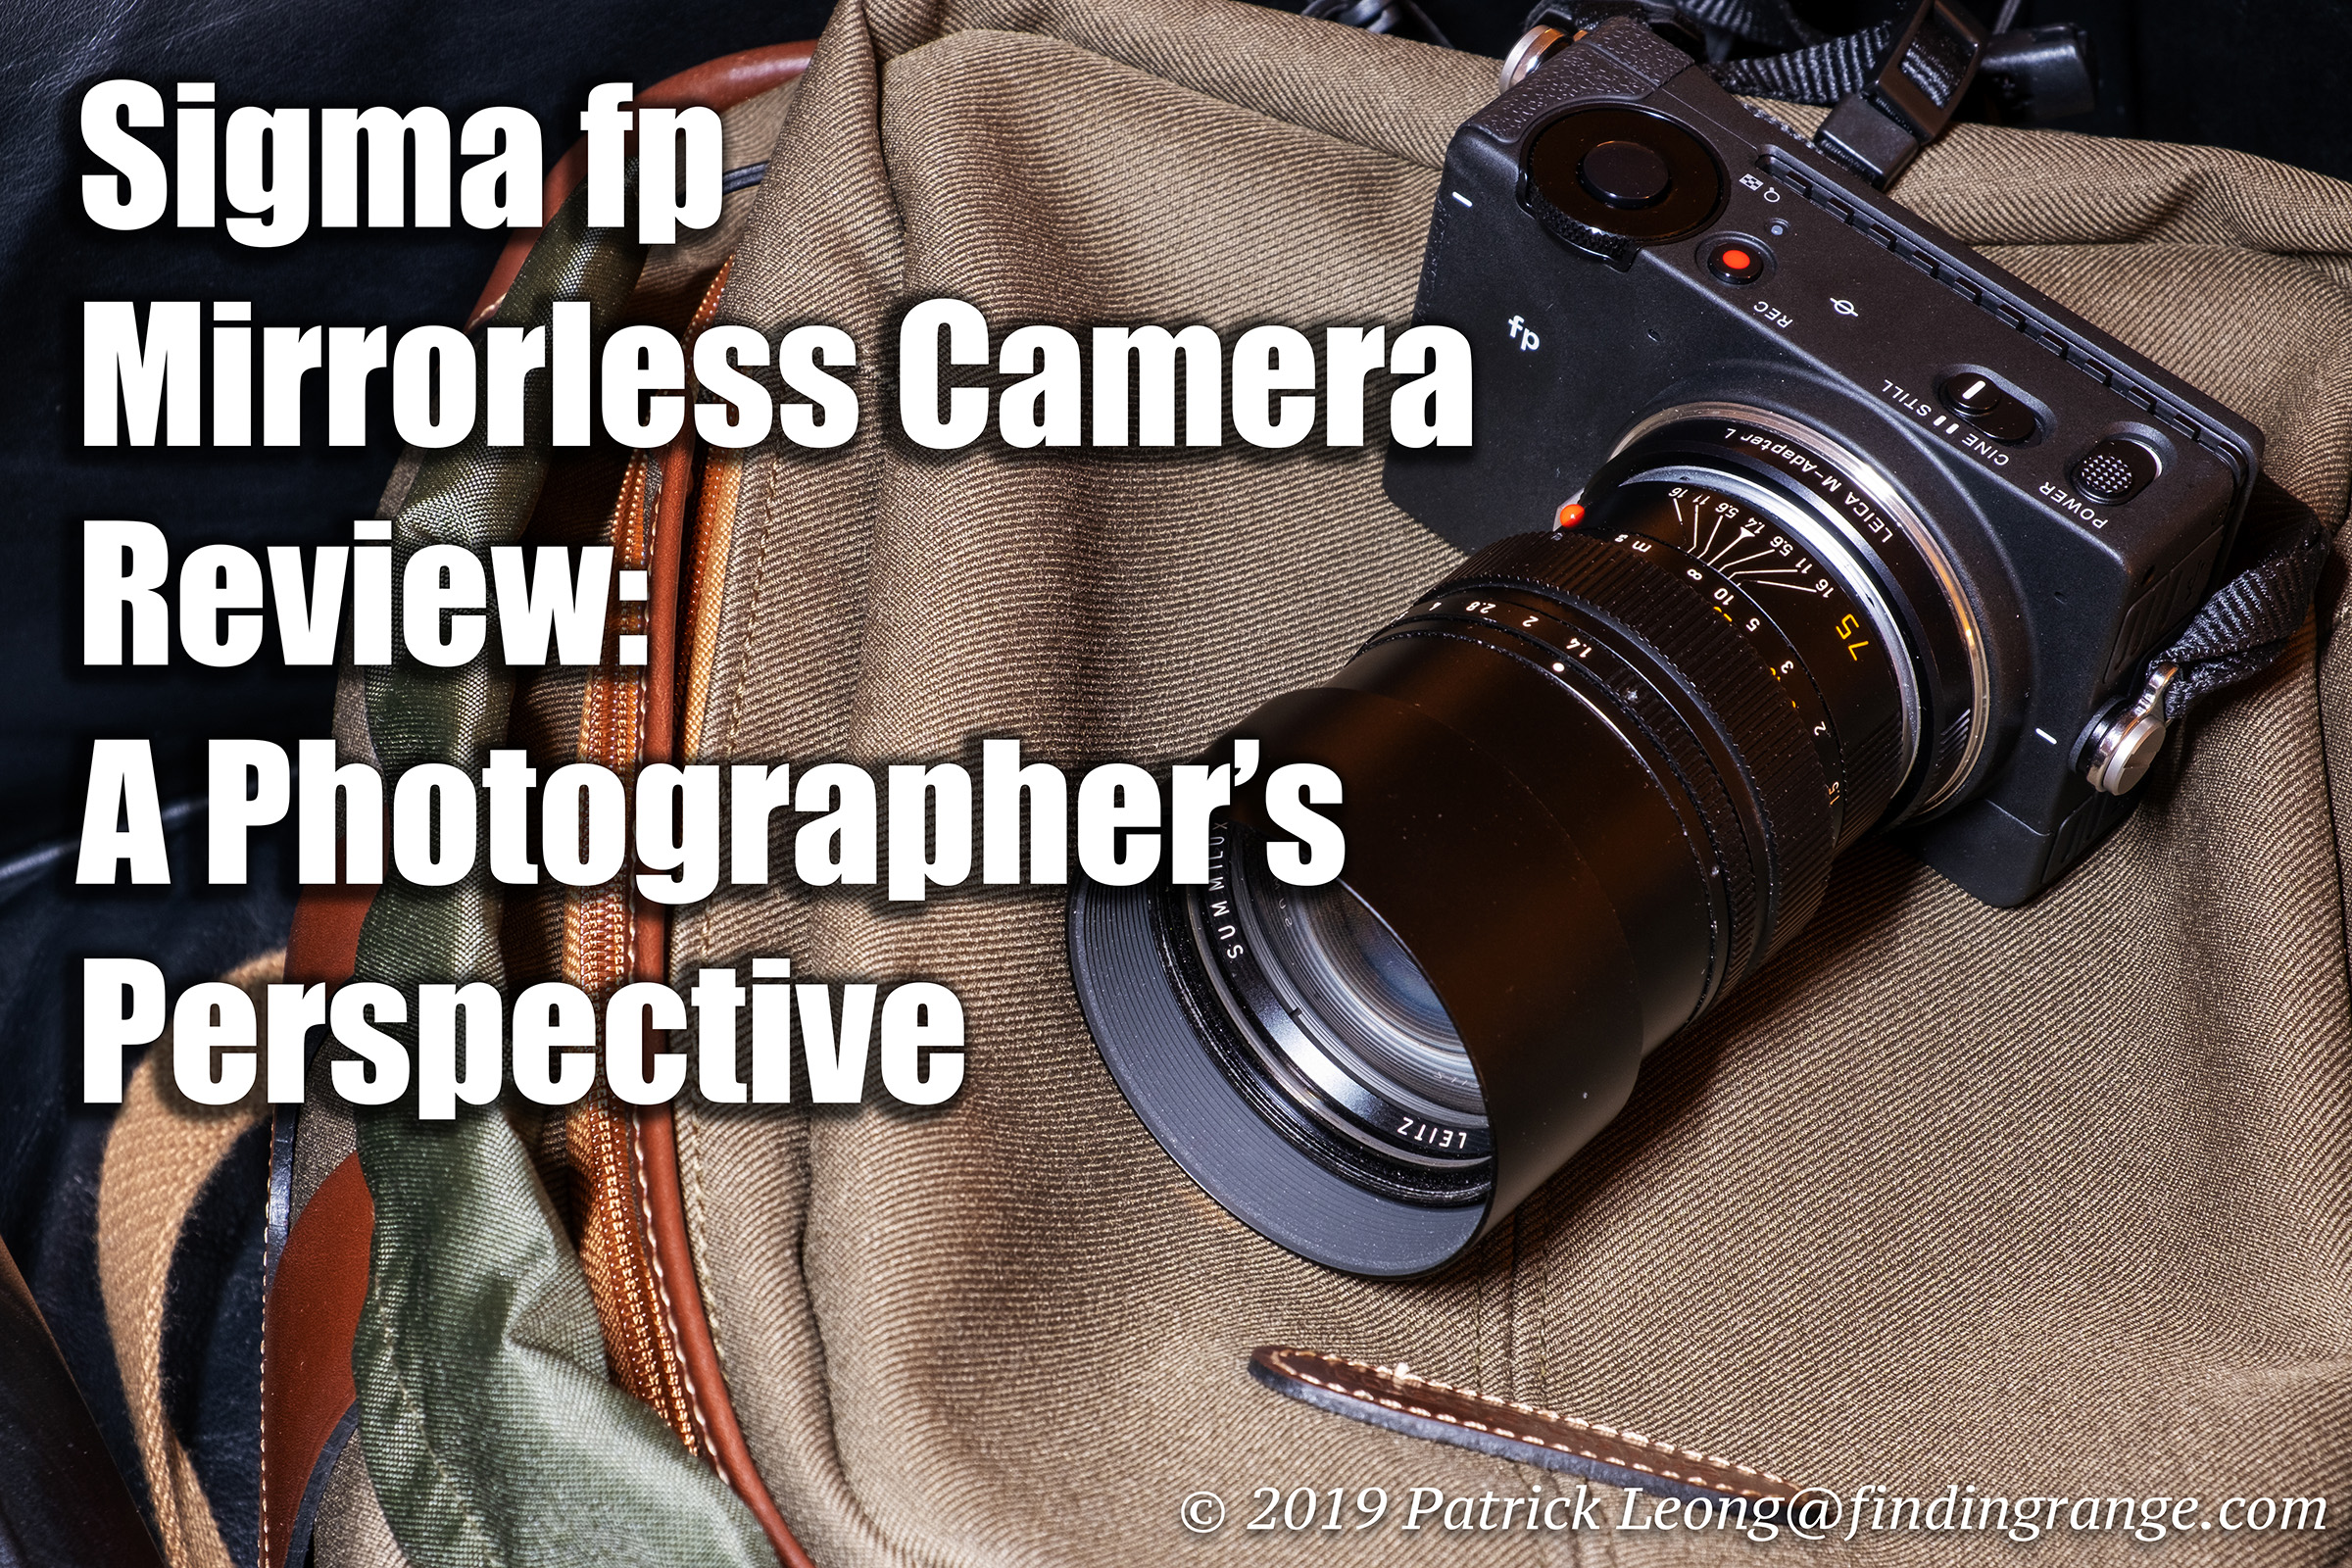 Sigma fp Mirrorless Camera Review: A Photographer's Perspective